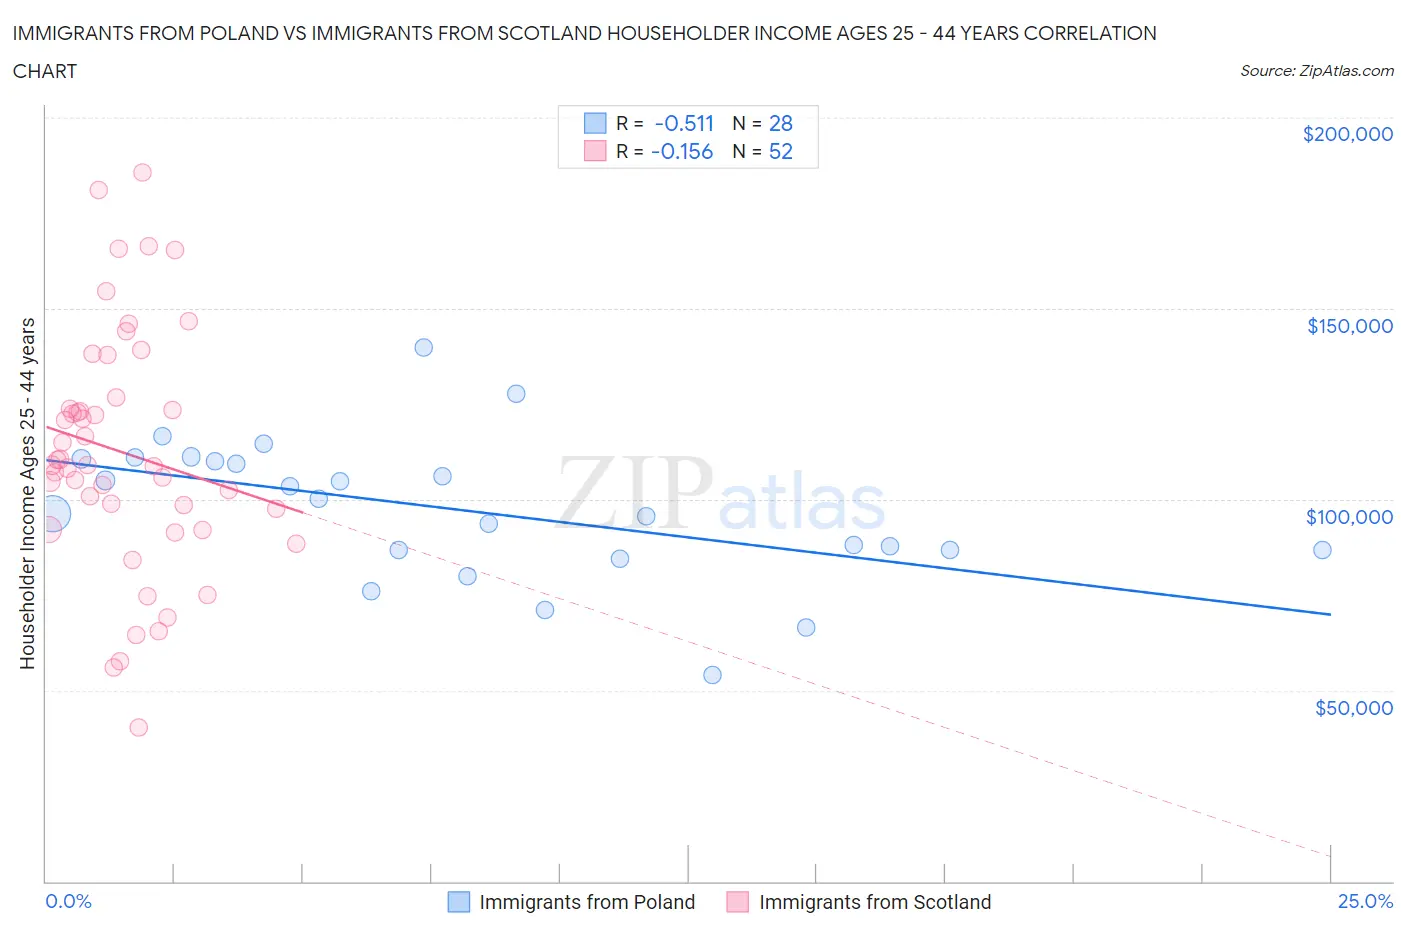 Immigrants from Poland vs Immigrants from Scotland Householder Income Ages 25 - 44 years